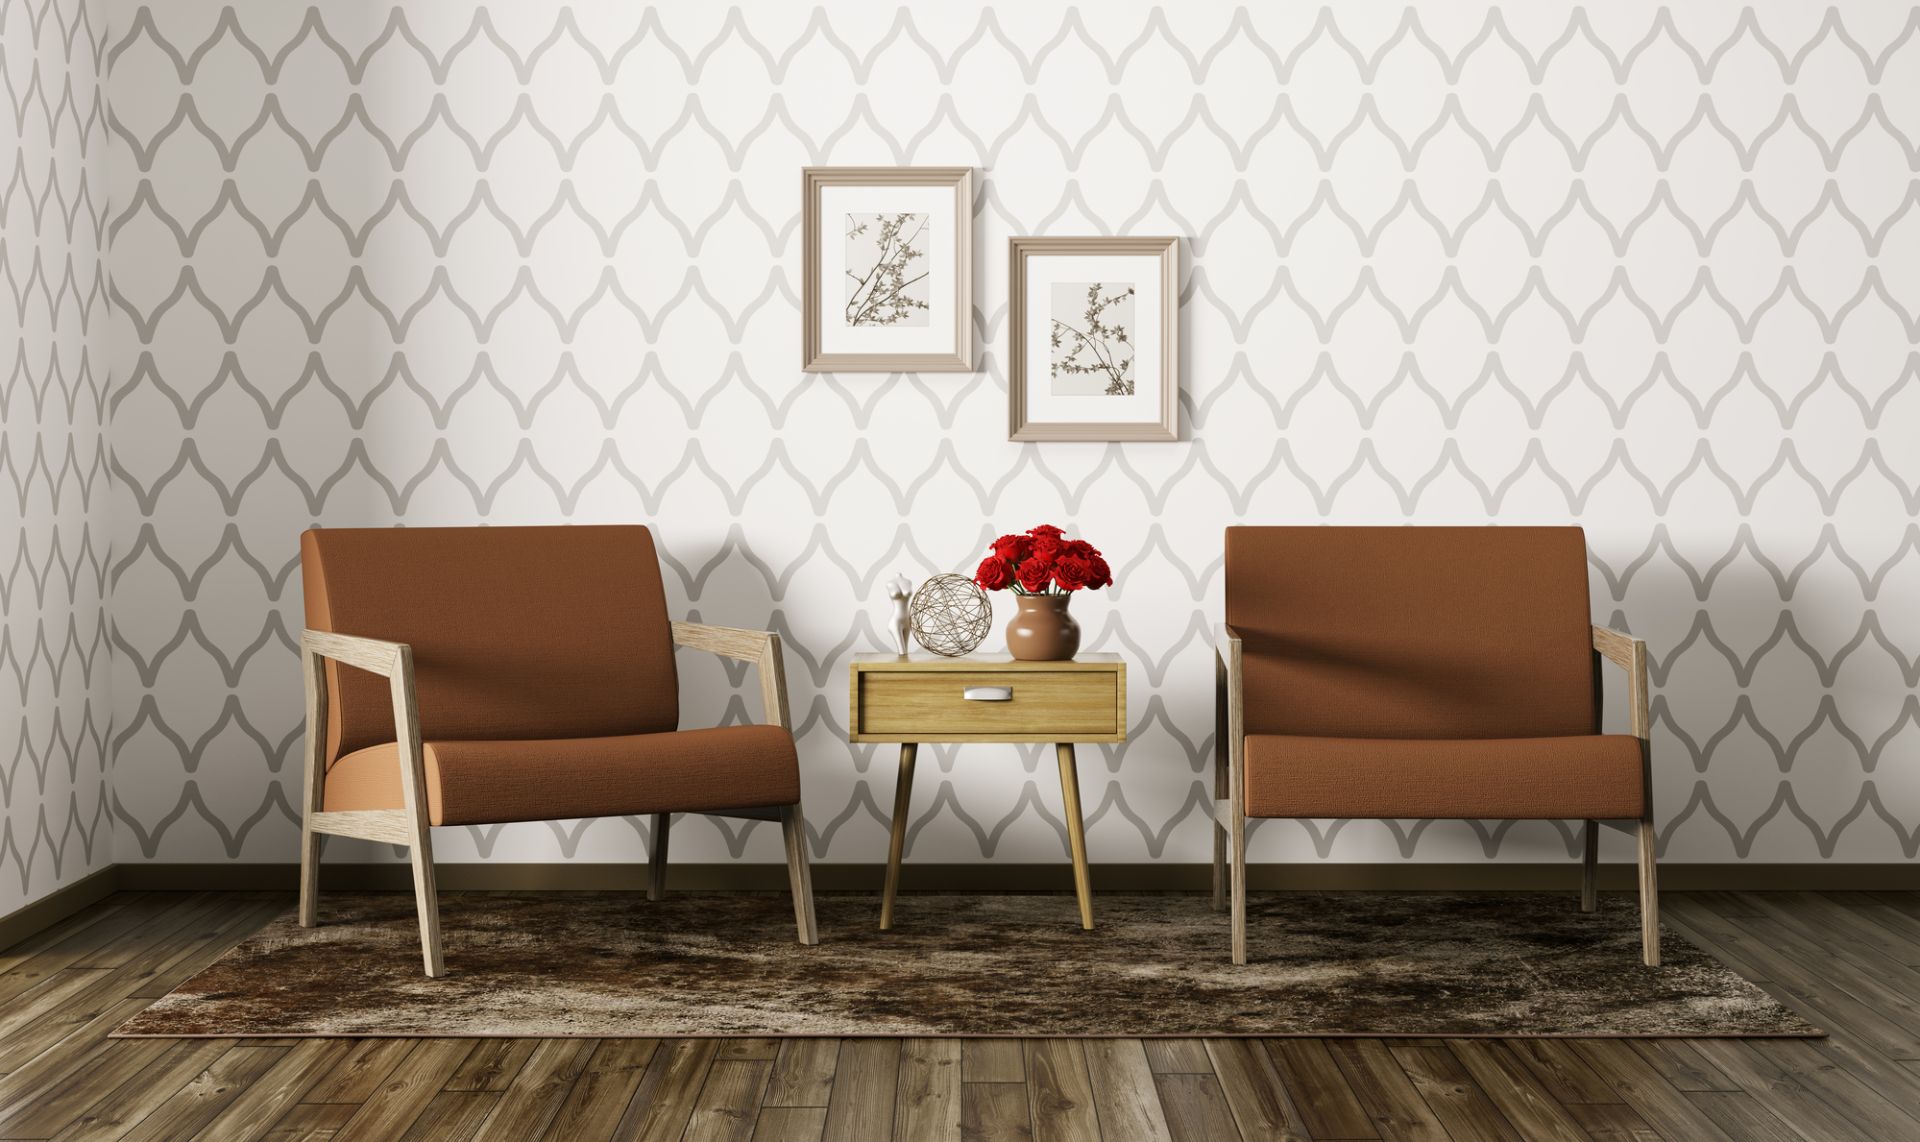 Wallpapers and Wall Coverings Installation in Vancouver